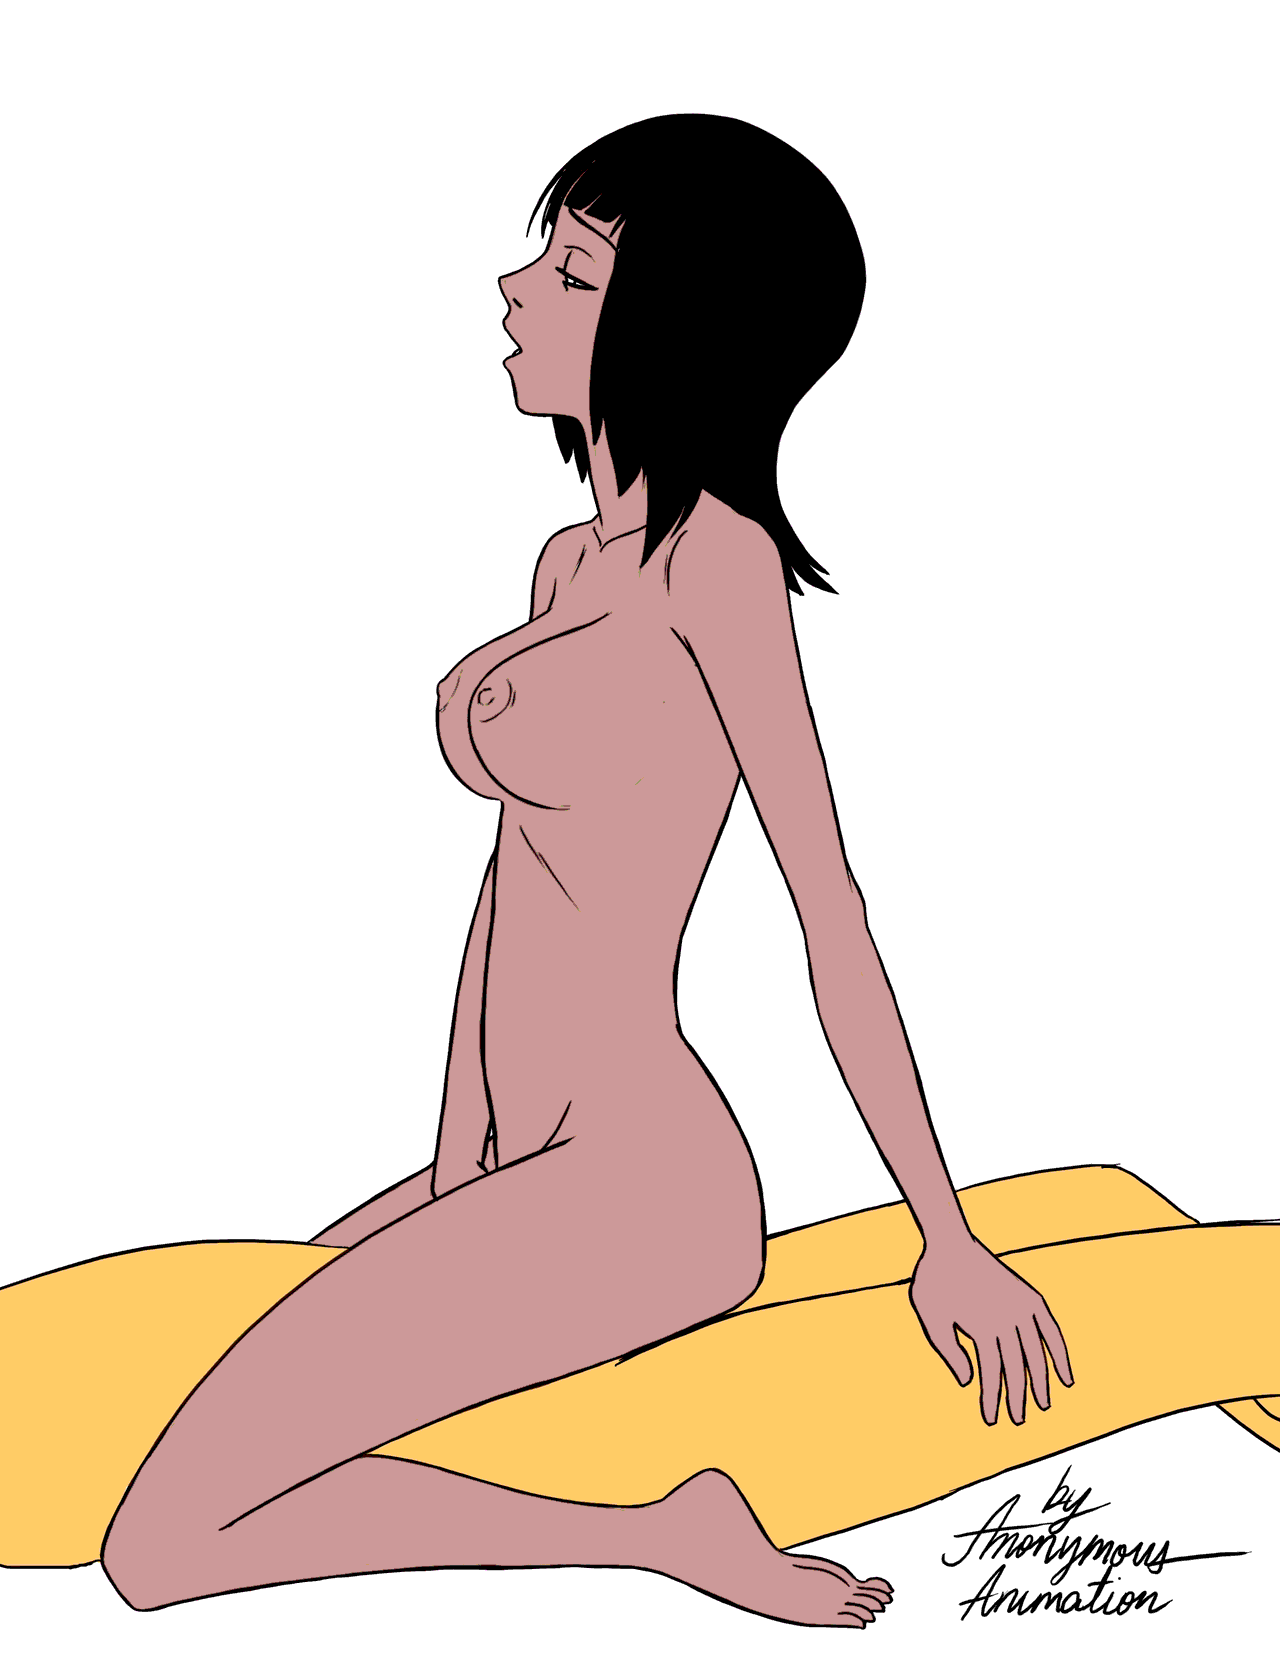 Toon sex pic ##0001301568822 animated animated animation black hair cowgirl  moaning nico robin one piece tanned skin | One Piece Hentai